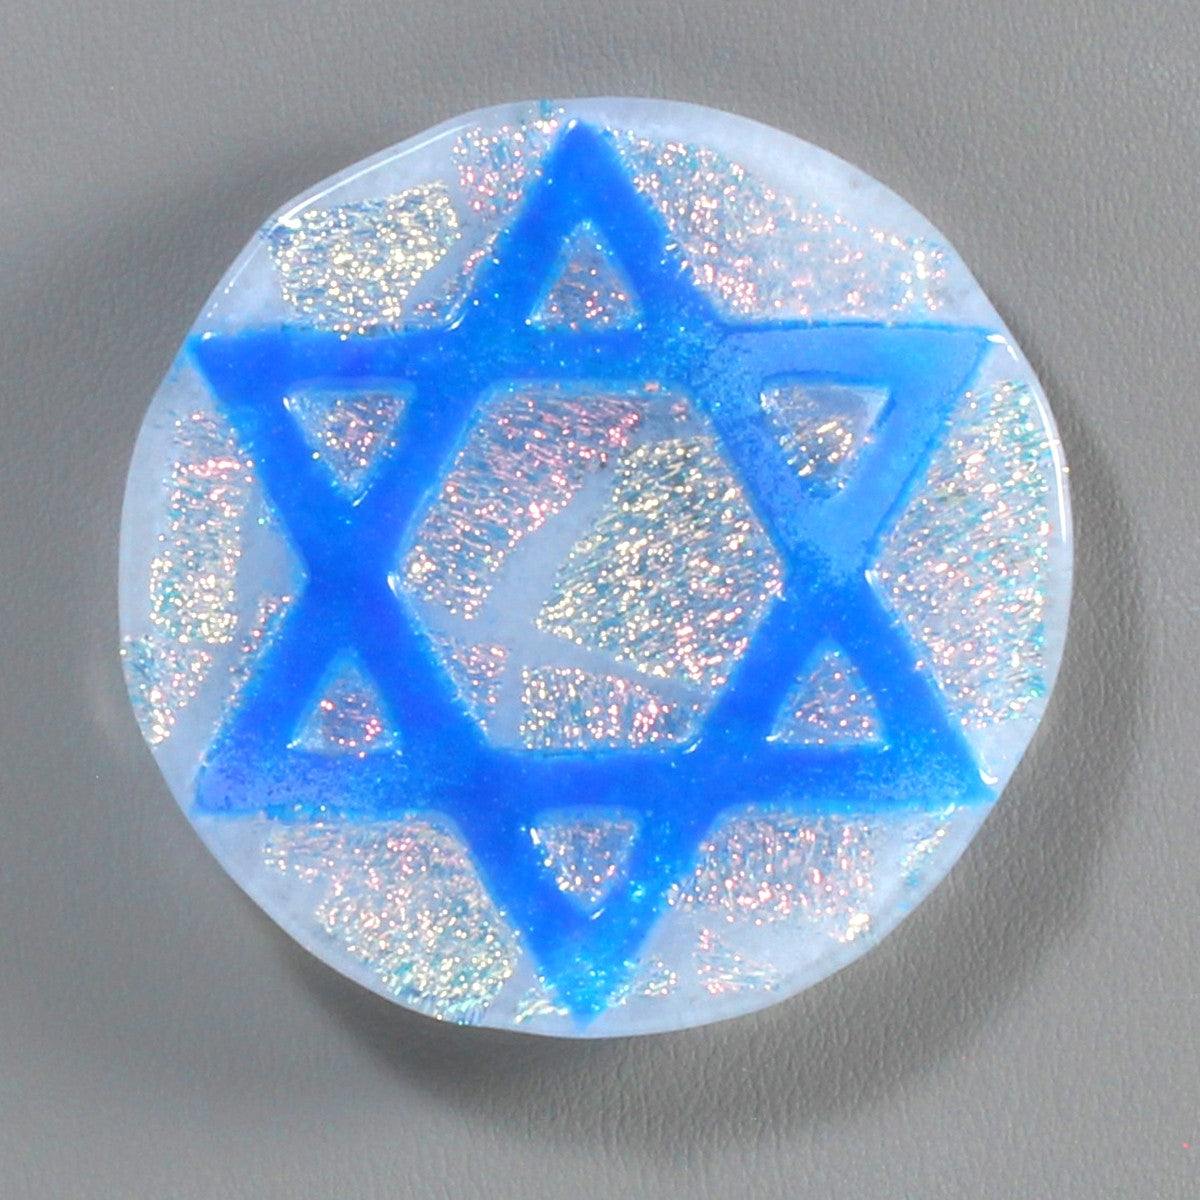 Example Star of David made using the Glass Frit Cast Mold LF06